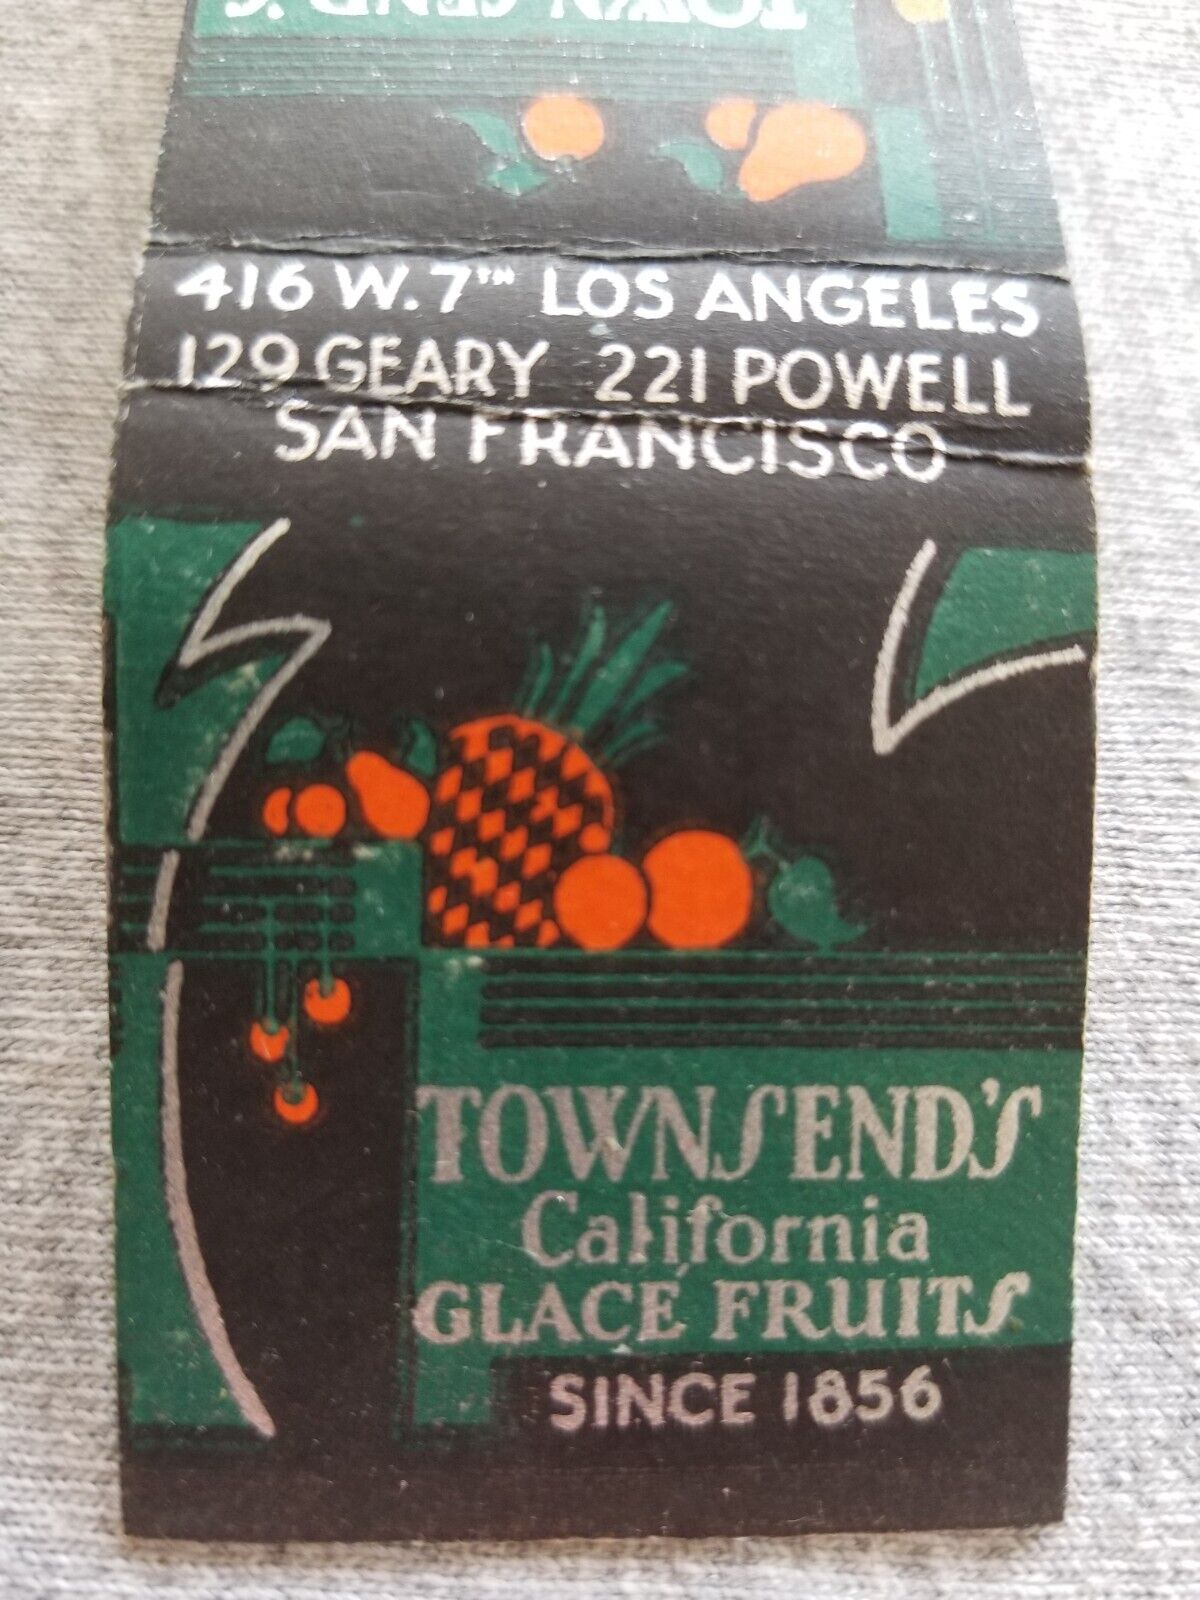 Vtg FS Matchbook Cover Townsends Glace Fruits Candy Restaurant San Francisco CA